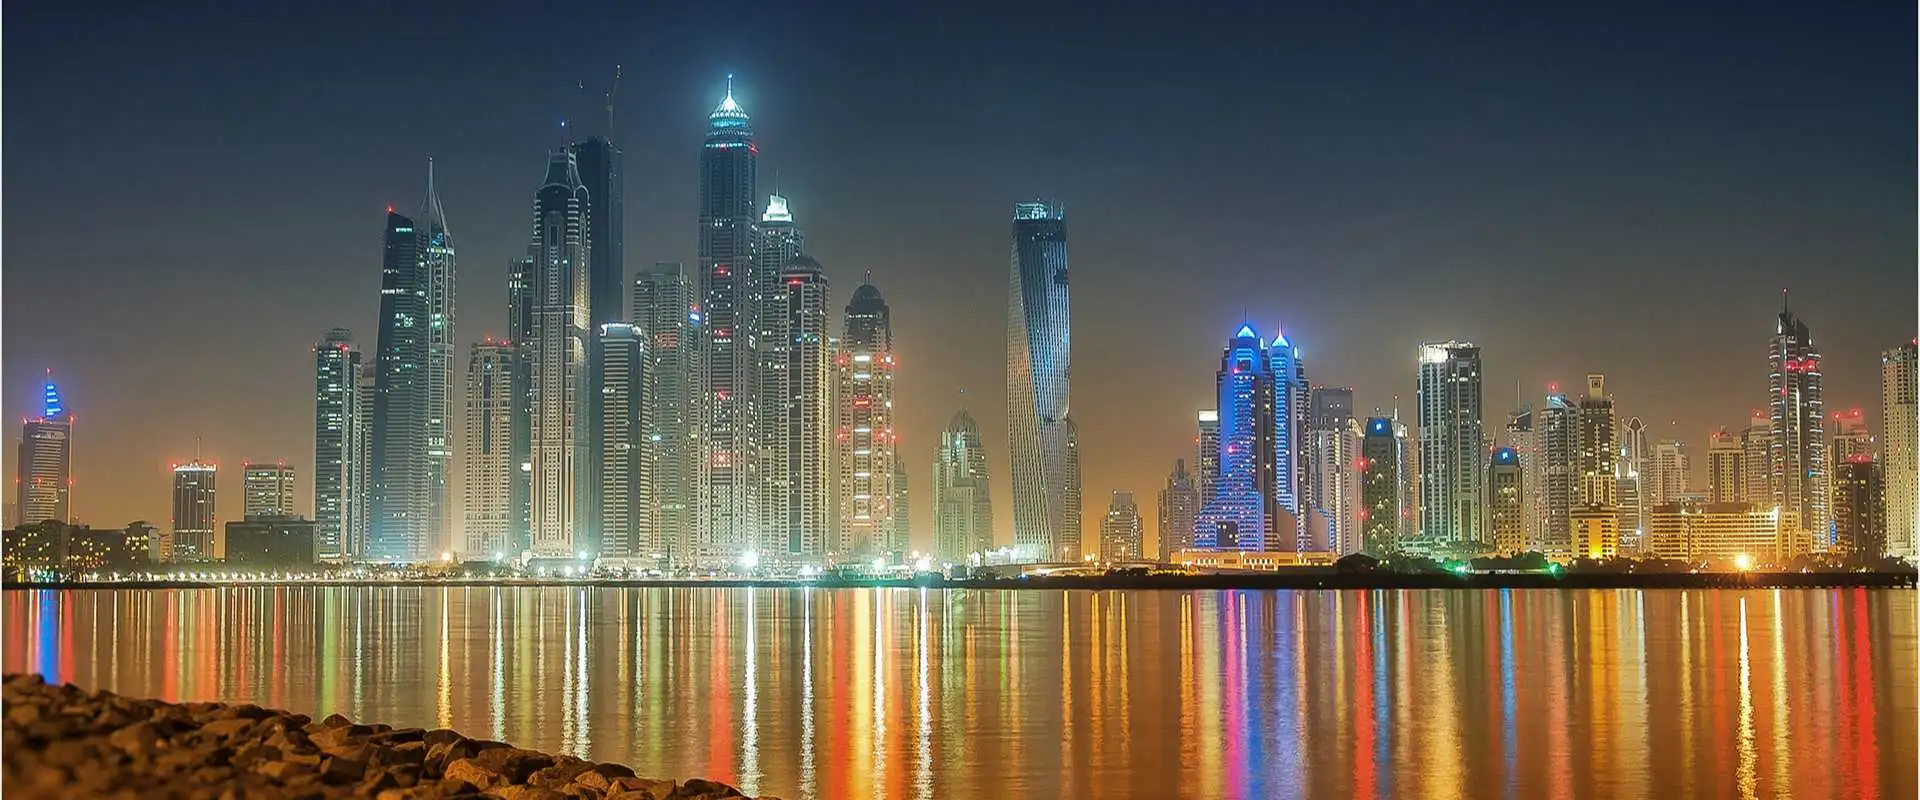 Dubai-is-the-number-one-city-expats-want-to-live-in